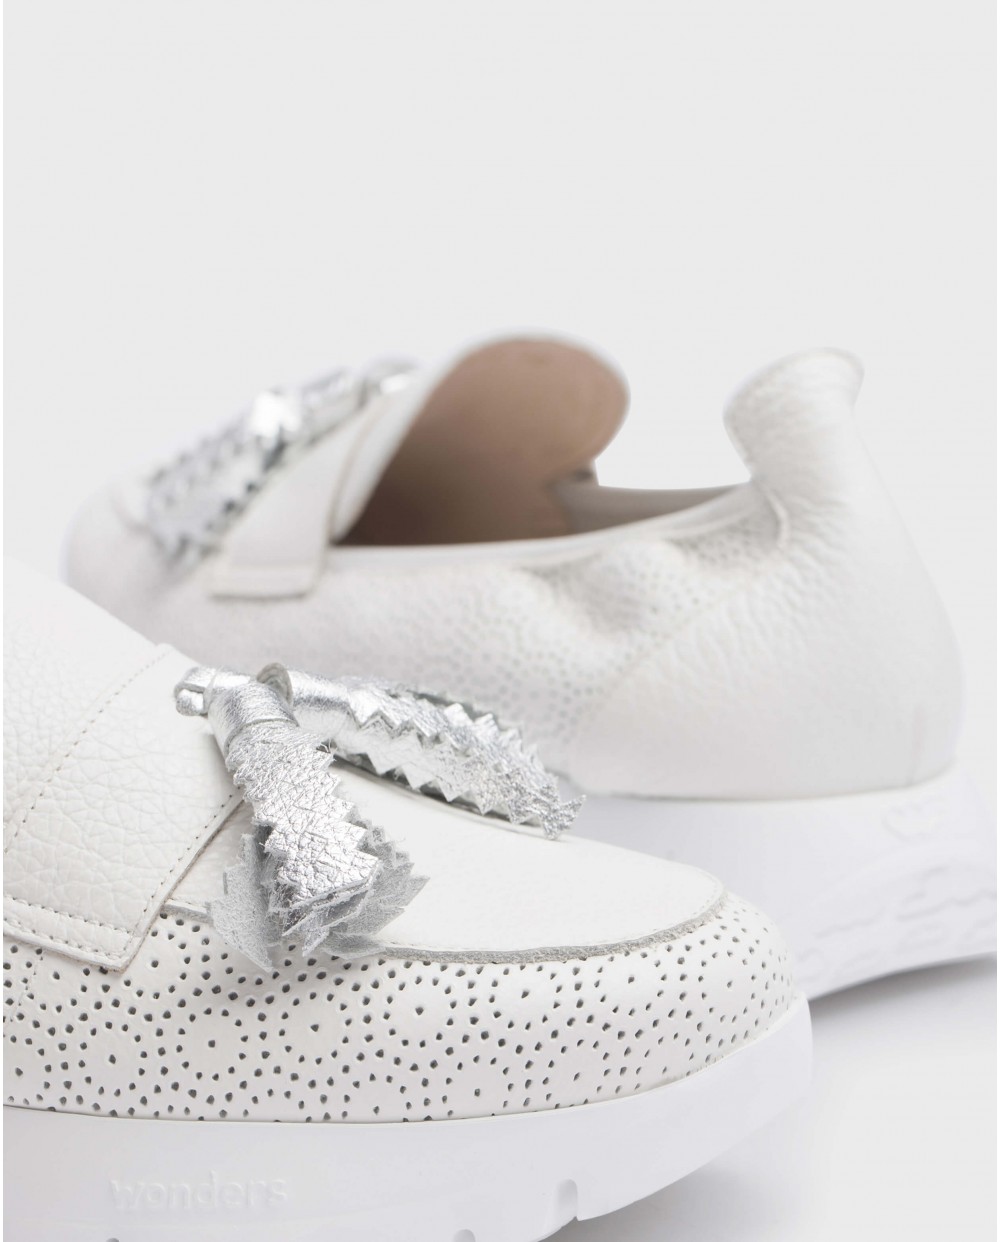 Wonders-Loafers-White Materia moccasin